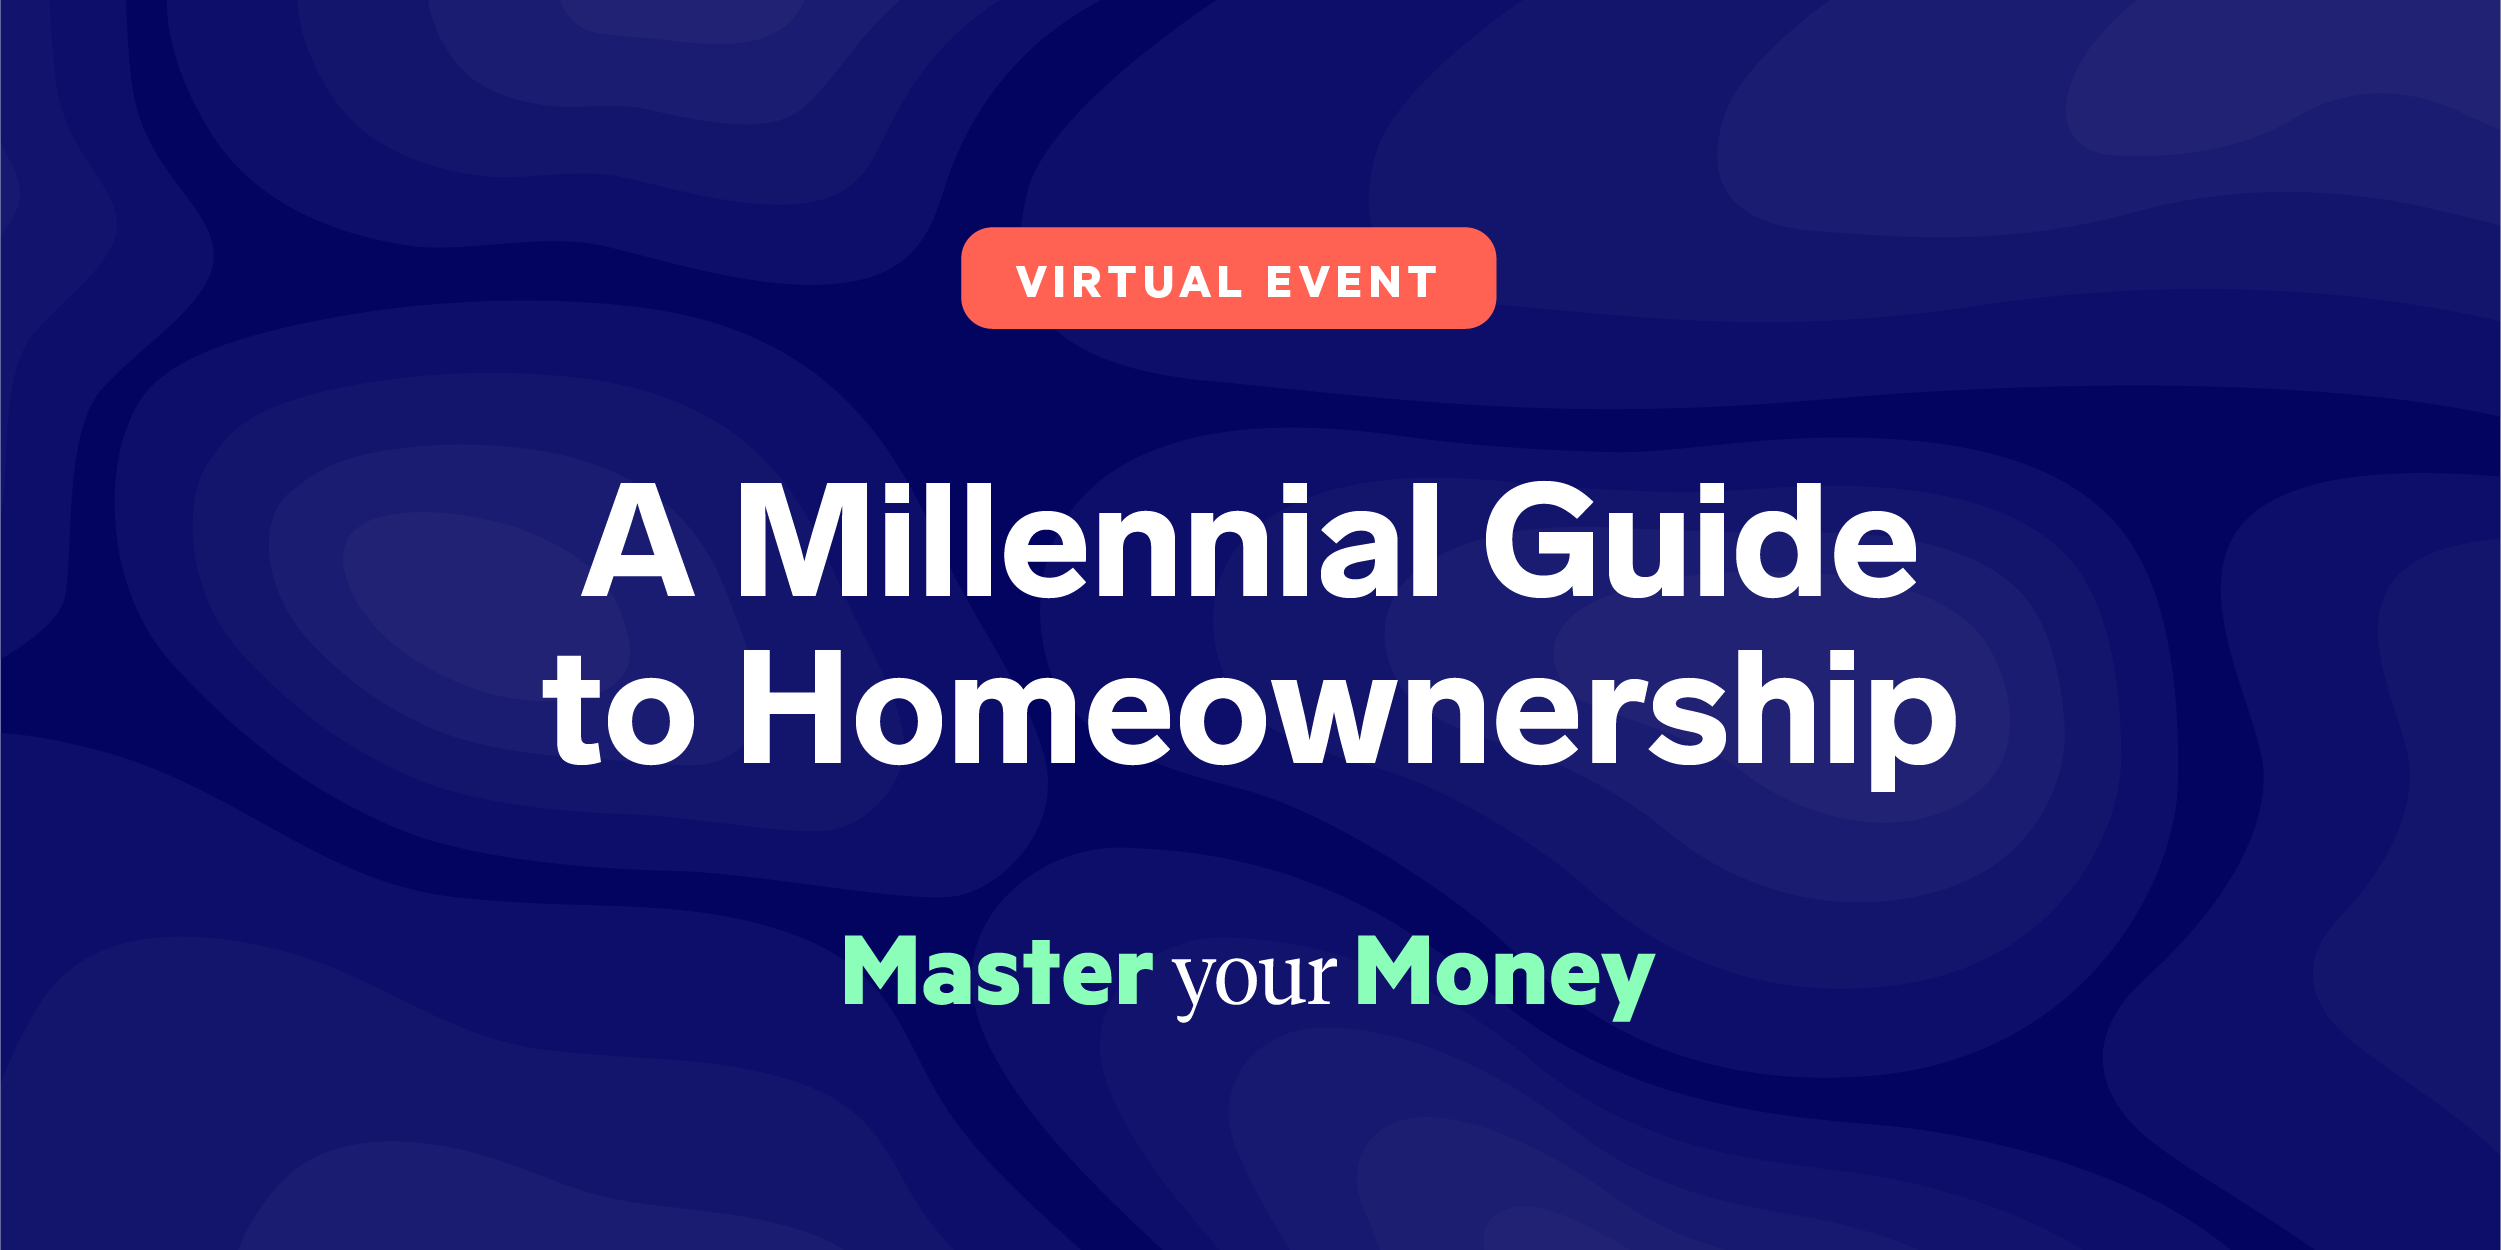 Master your Money virtual event graphic with the text 'A Millennial Guide to Homeownership.'